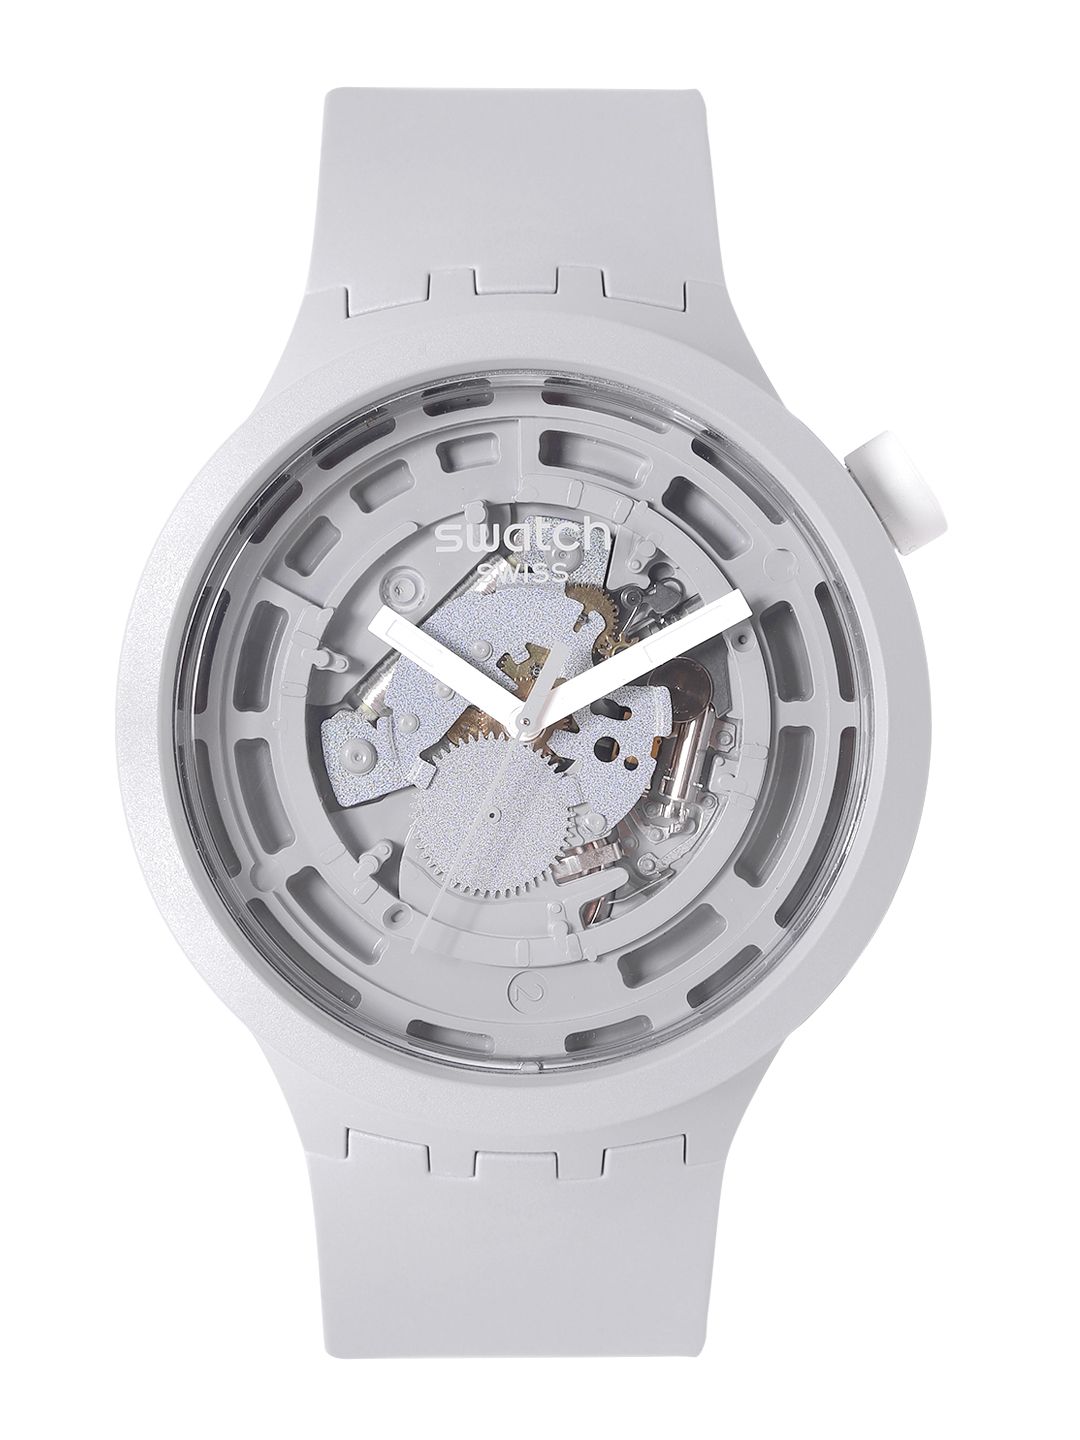 Swatch Unisex Grey Boost Swiss Made Skeleton Dial Water Resistant Analogue Watch SB03M100 Price in India